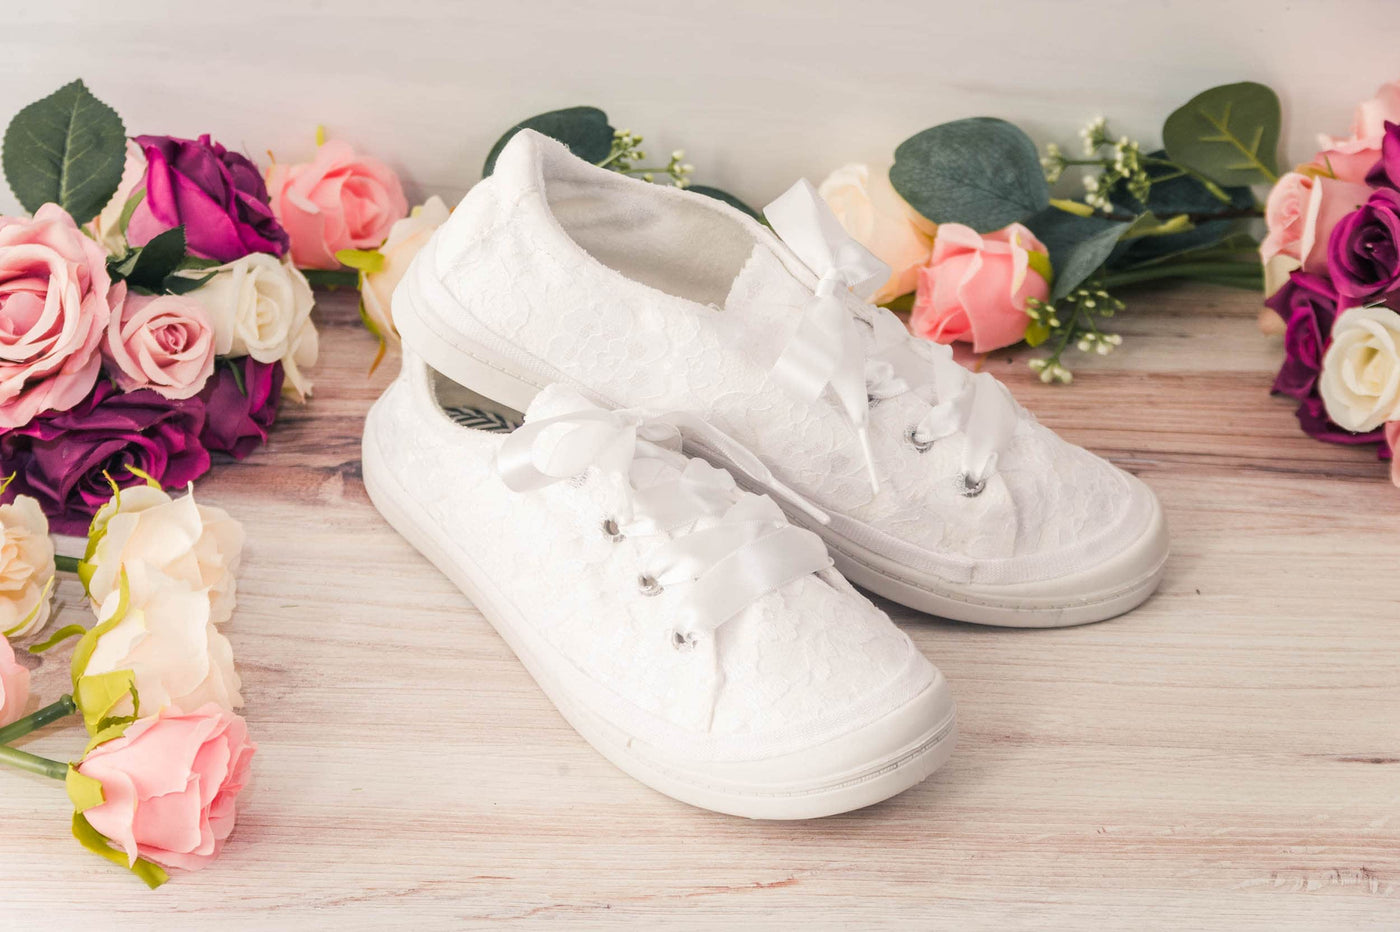 Wedding Shoes! Cute Bridal White Lace Slip On Sneakers for Brides, Bridesmaids, Reception Shoes, Custom Shoes, Gifts for Her